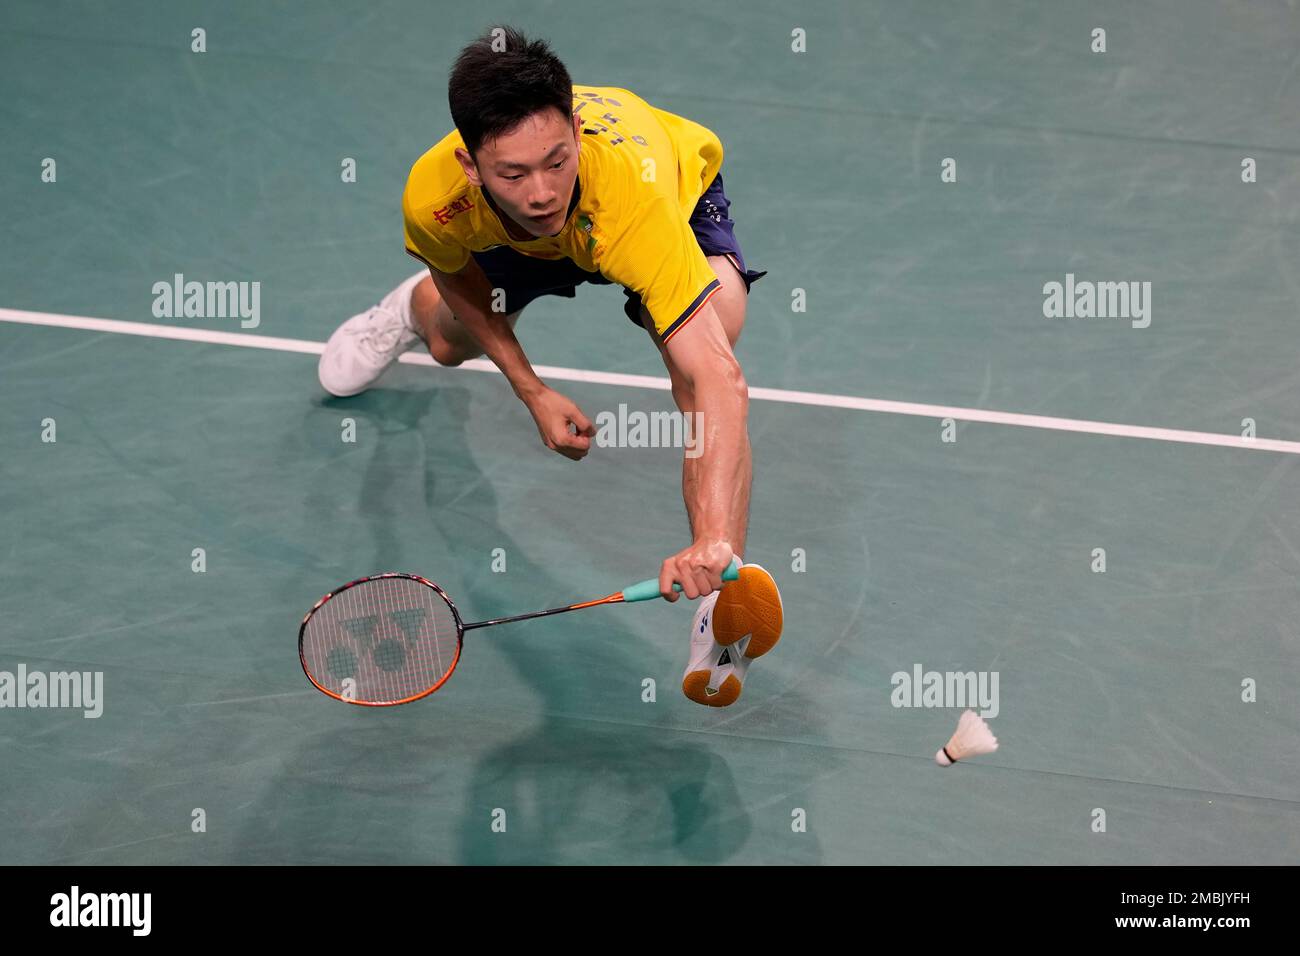 Lei Lanxi from China returns a shot against Chan Yin Chak from Hongkong during the mens singles qualification round of the Badminton Asia Championships 2022 in Muntinlupa, Philippines on Tuesday, April 26,